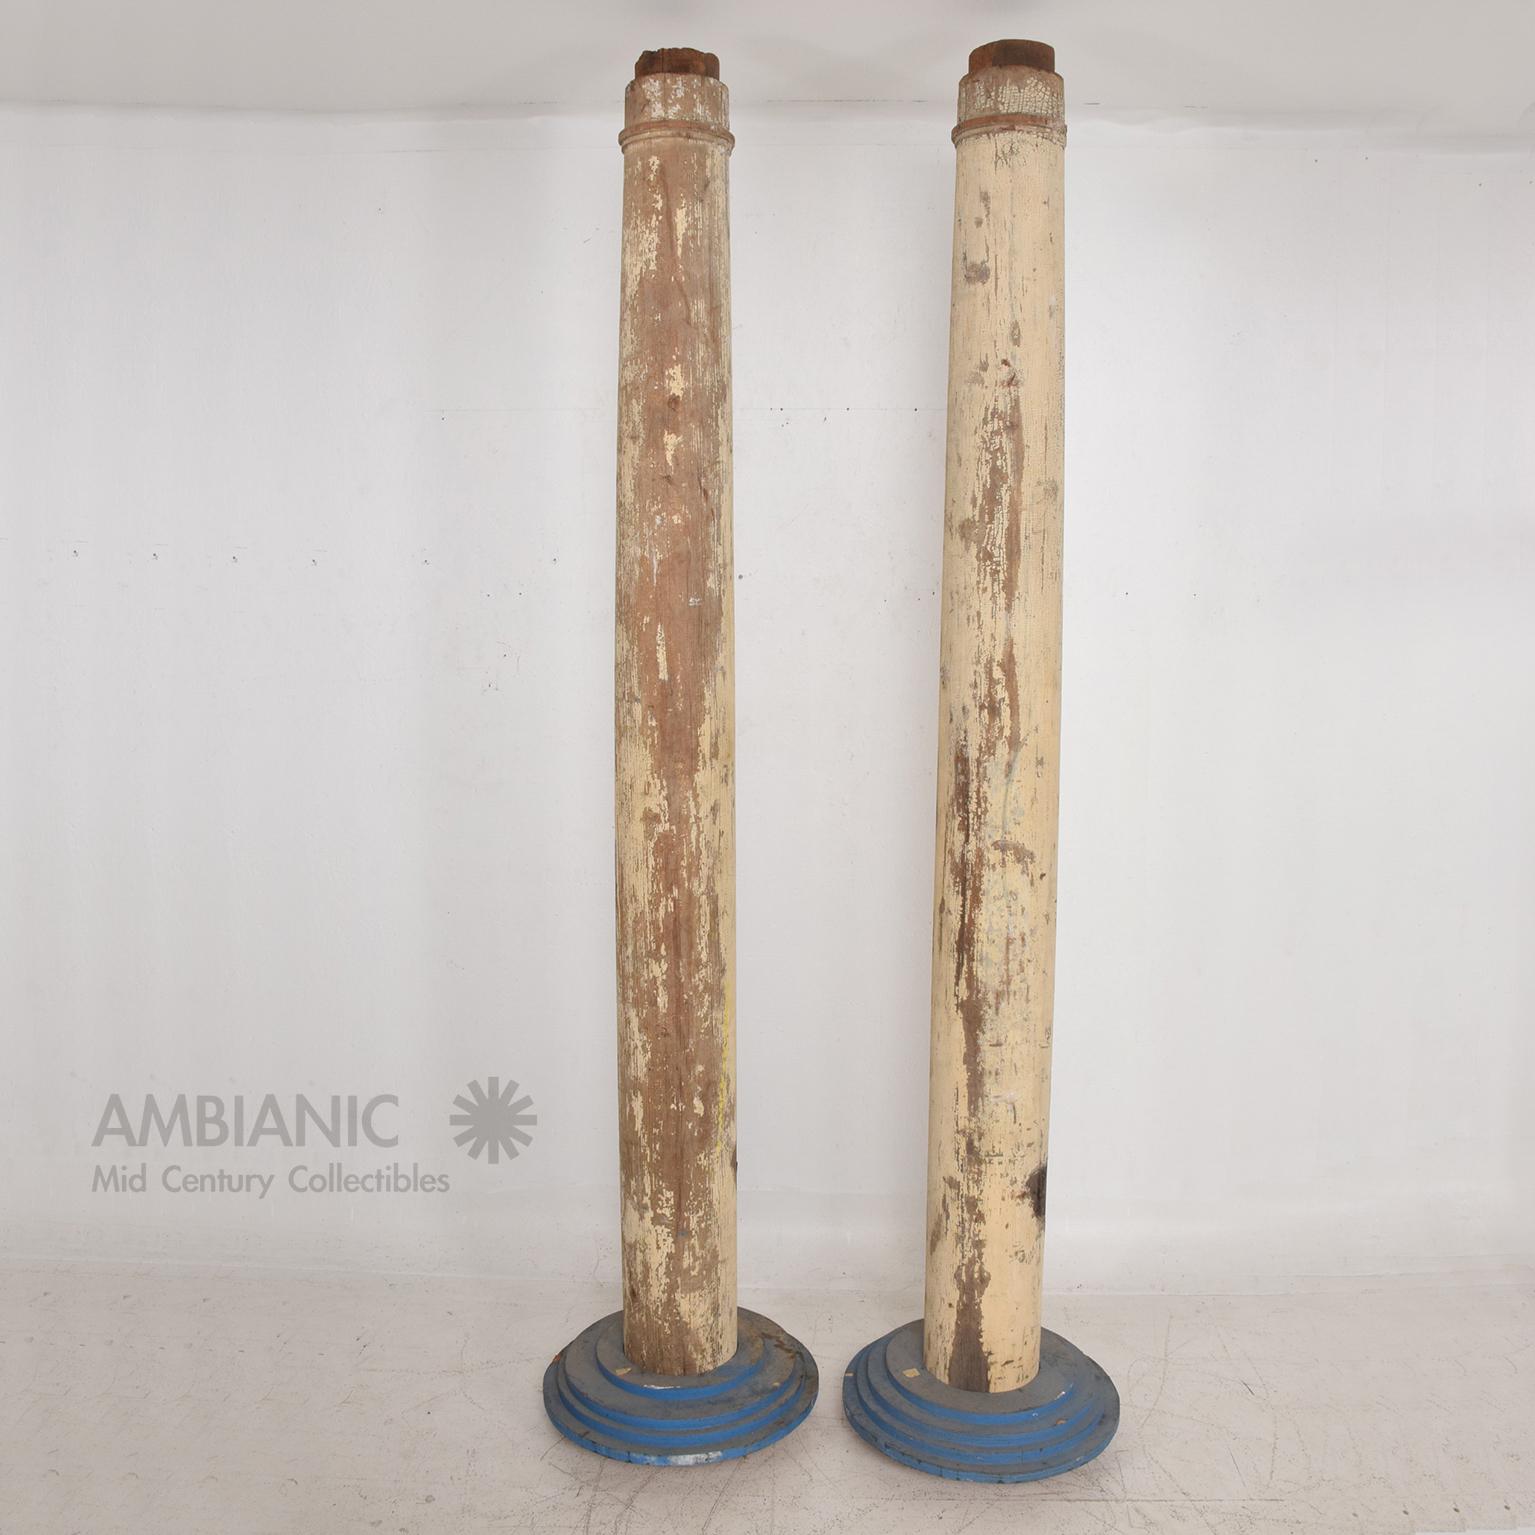 1930s Vintage Architectural Modern Wood Columns set of 4
Distressed condition includes original paint and patina. 
Tall: 88.5 H x 7.5 diameter, Base 18 diameter,
Short: 53 x 5.75 diameter, 15.75 diameter.
Original Unrestored distressed Vintage